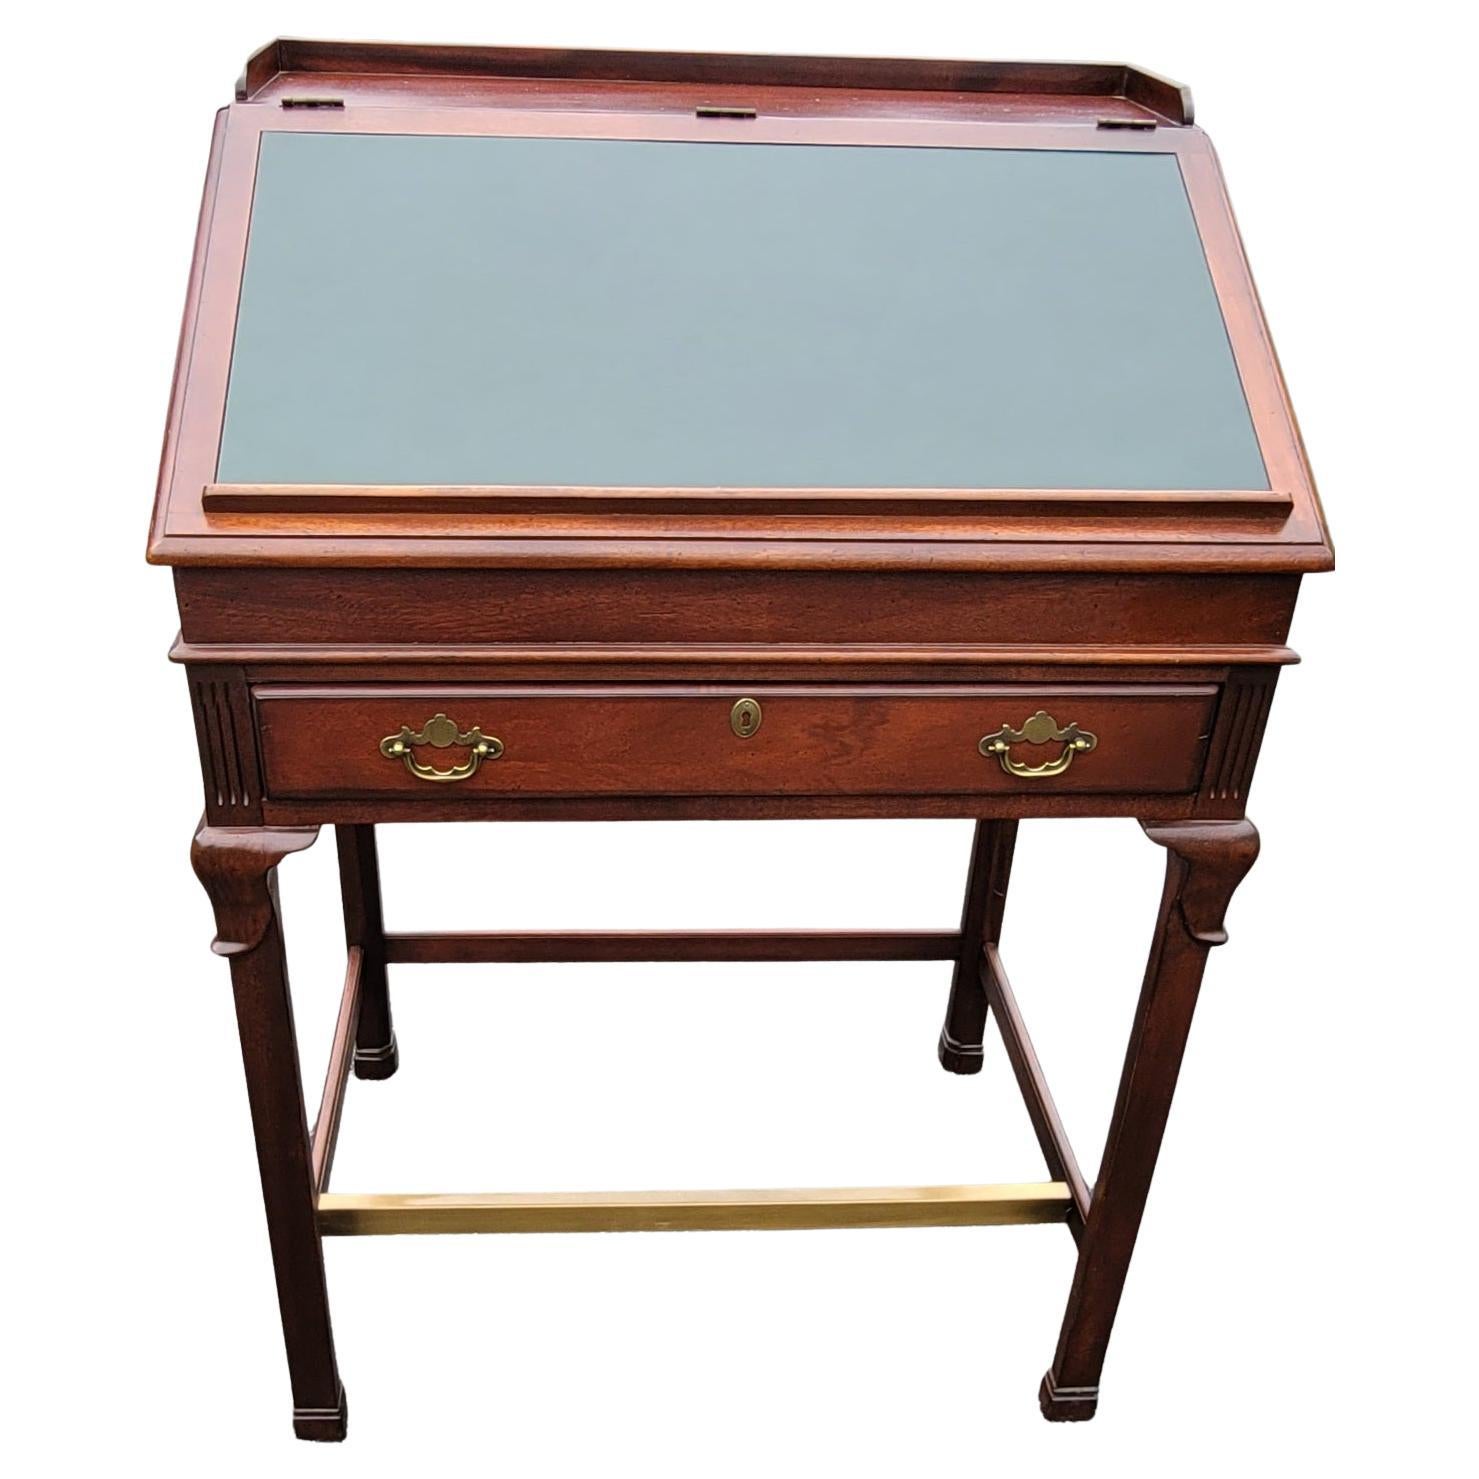 A very rare, limited edition Lexington Furniture's Palmer Home Collection Mahogany  and Tooled Leather  Slant Top Drafting Desk, drafting table with brass feet support and pull-out trays. Large storage drawer with two brass drop pulls. Dark green